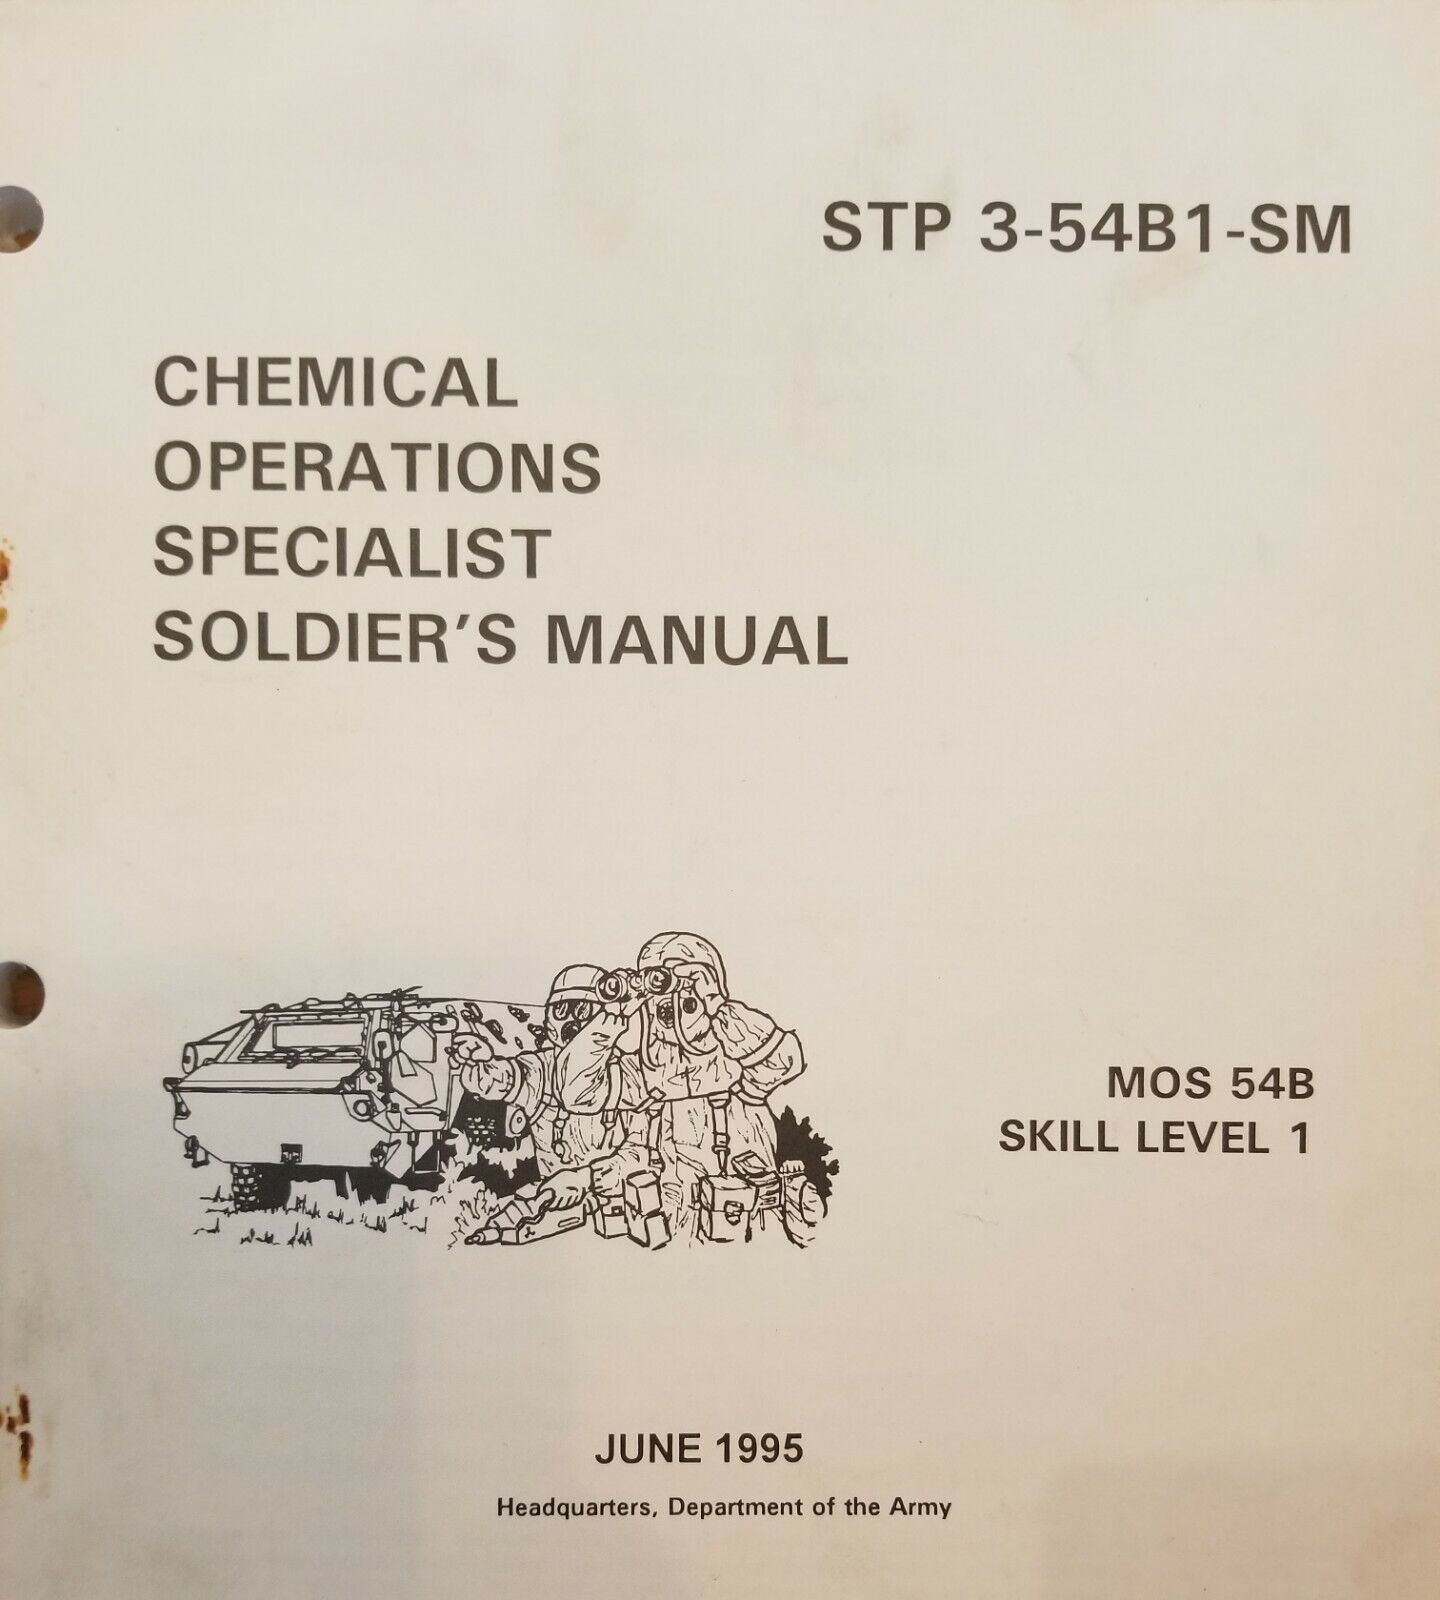 STP 3-54B1-SM Chemical Operations Specialist Soldier's Manual, MOS 54B SL1 1995